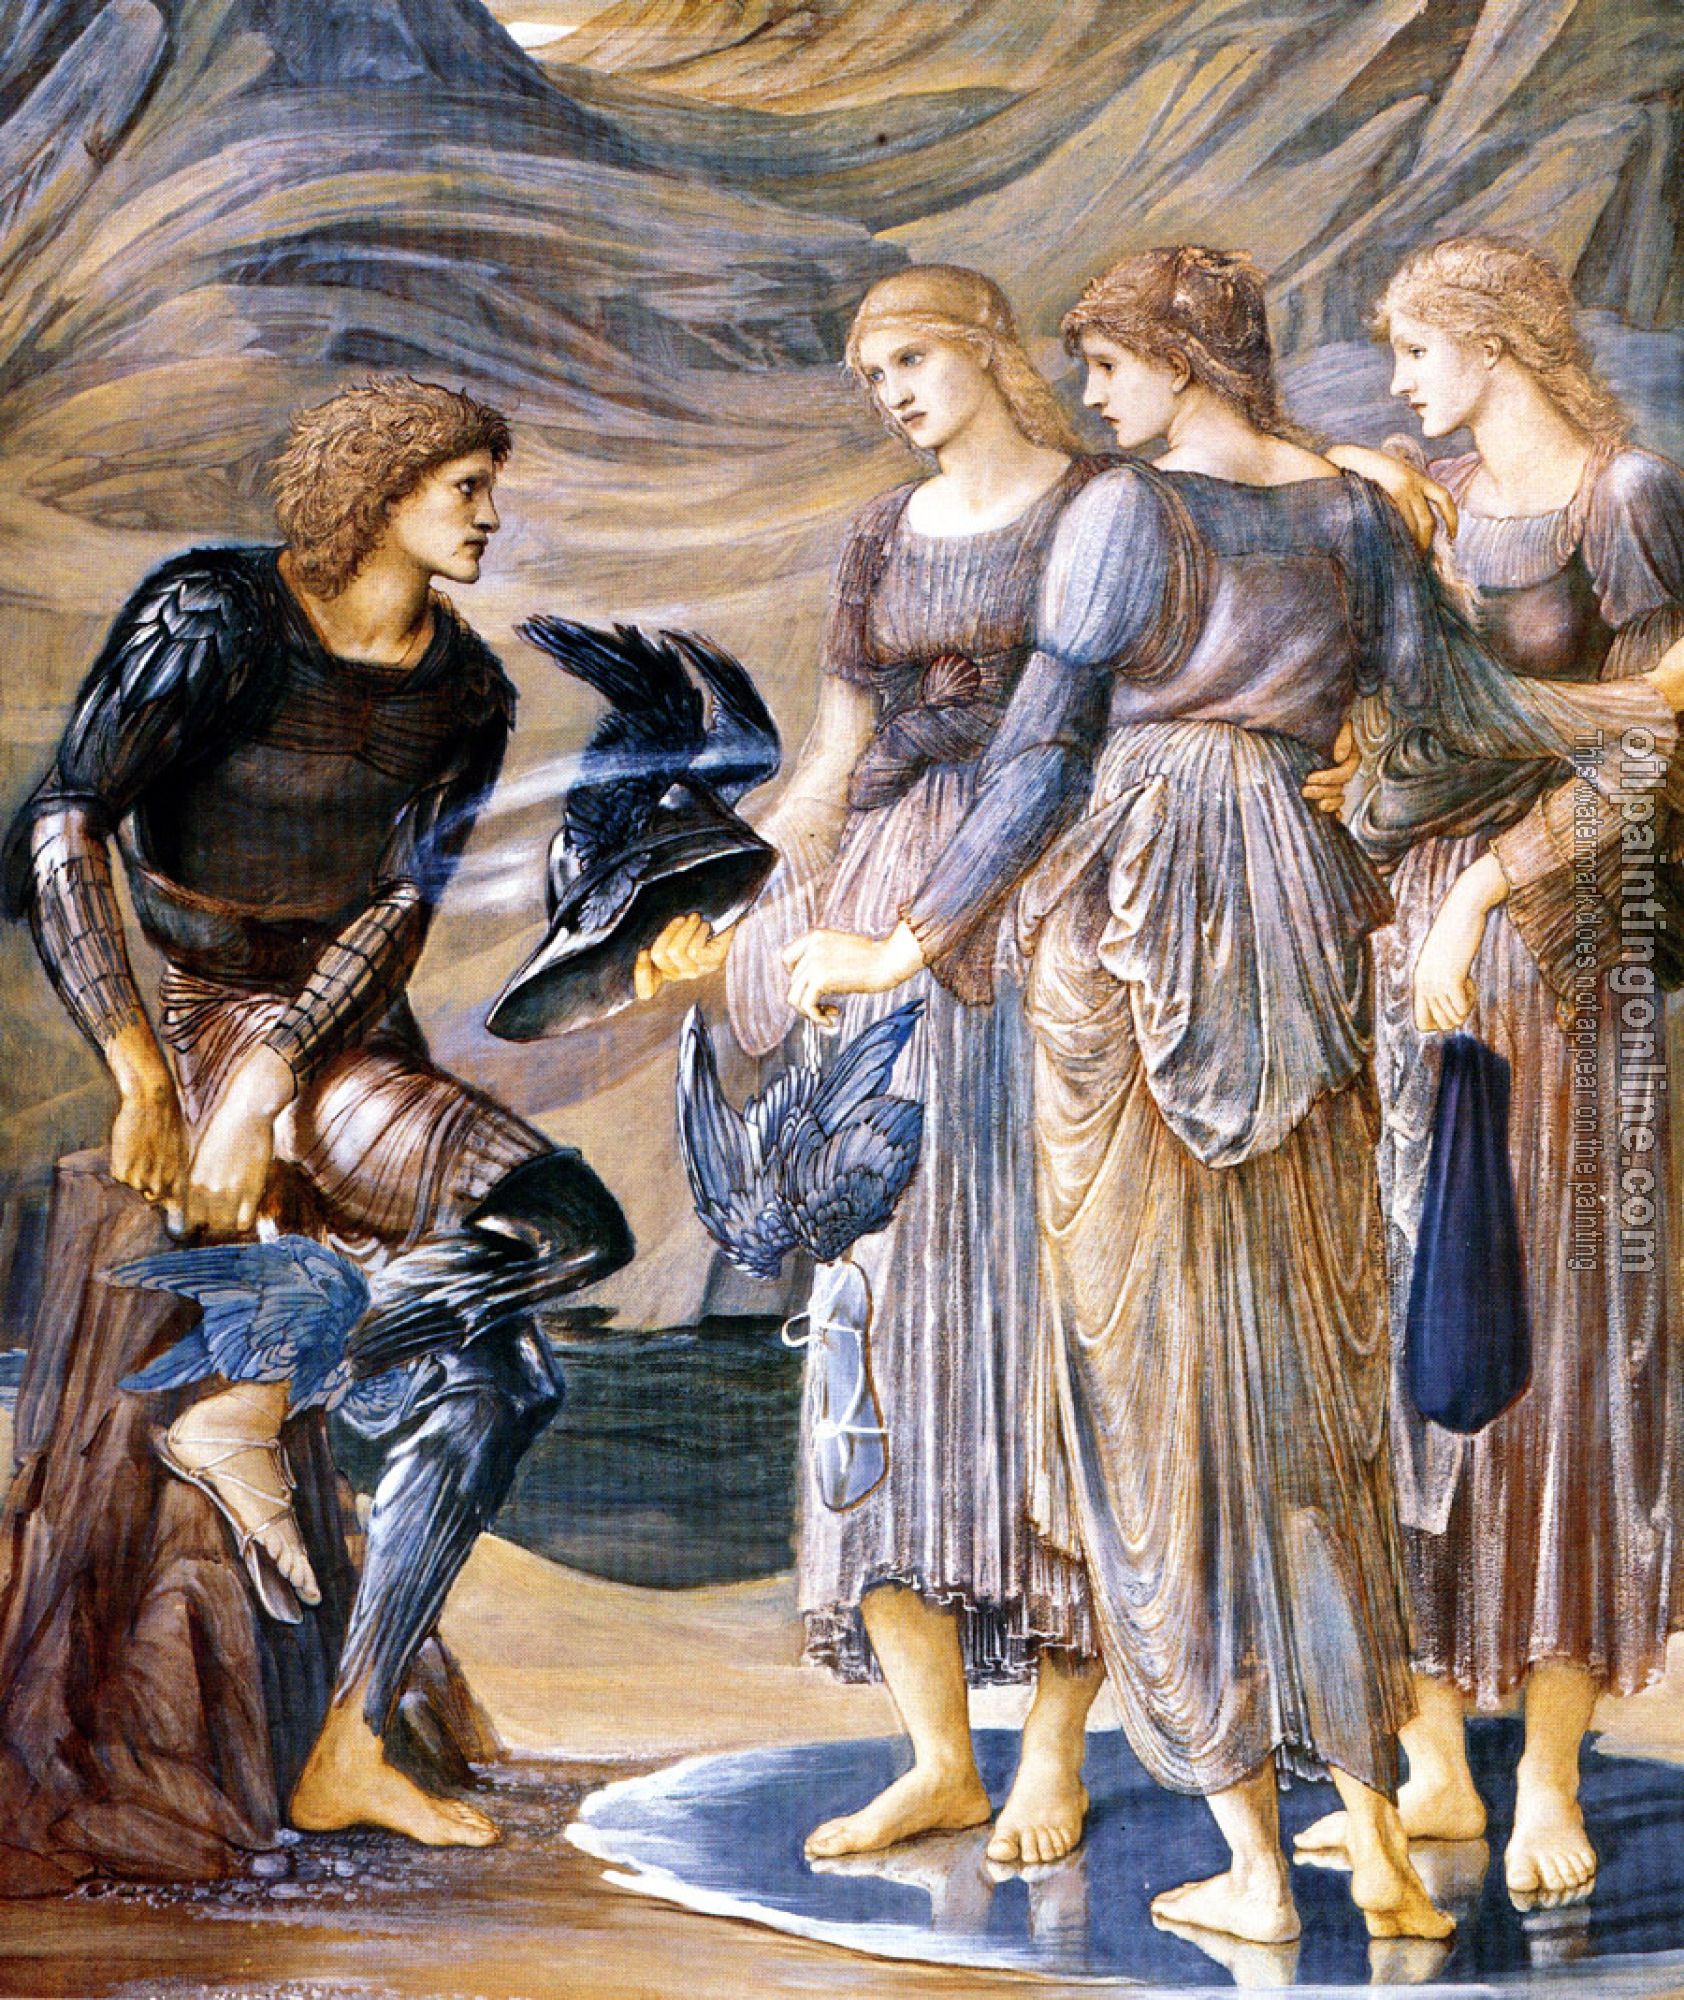 Burne-Jones, Sir Edward Coley - Perseus and the Sea Nymphs